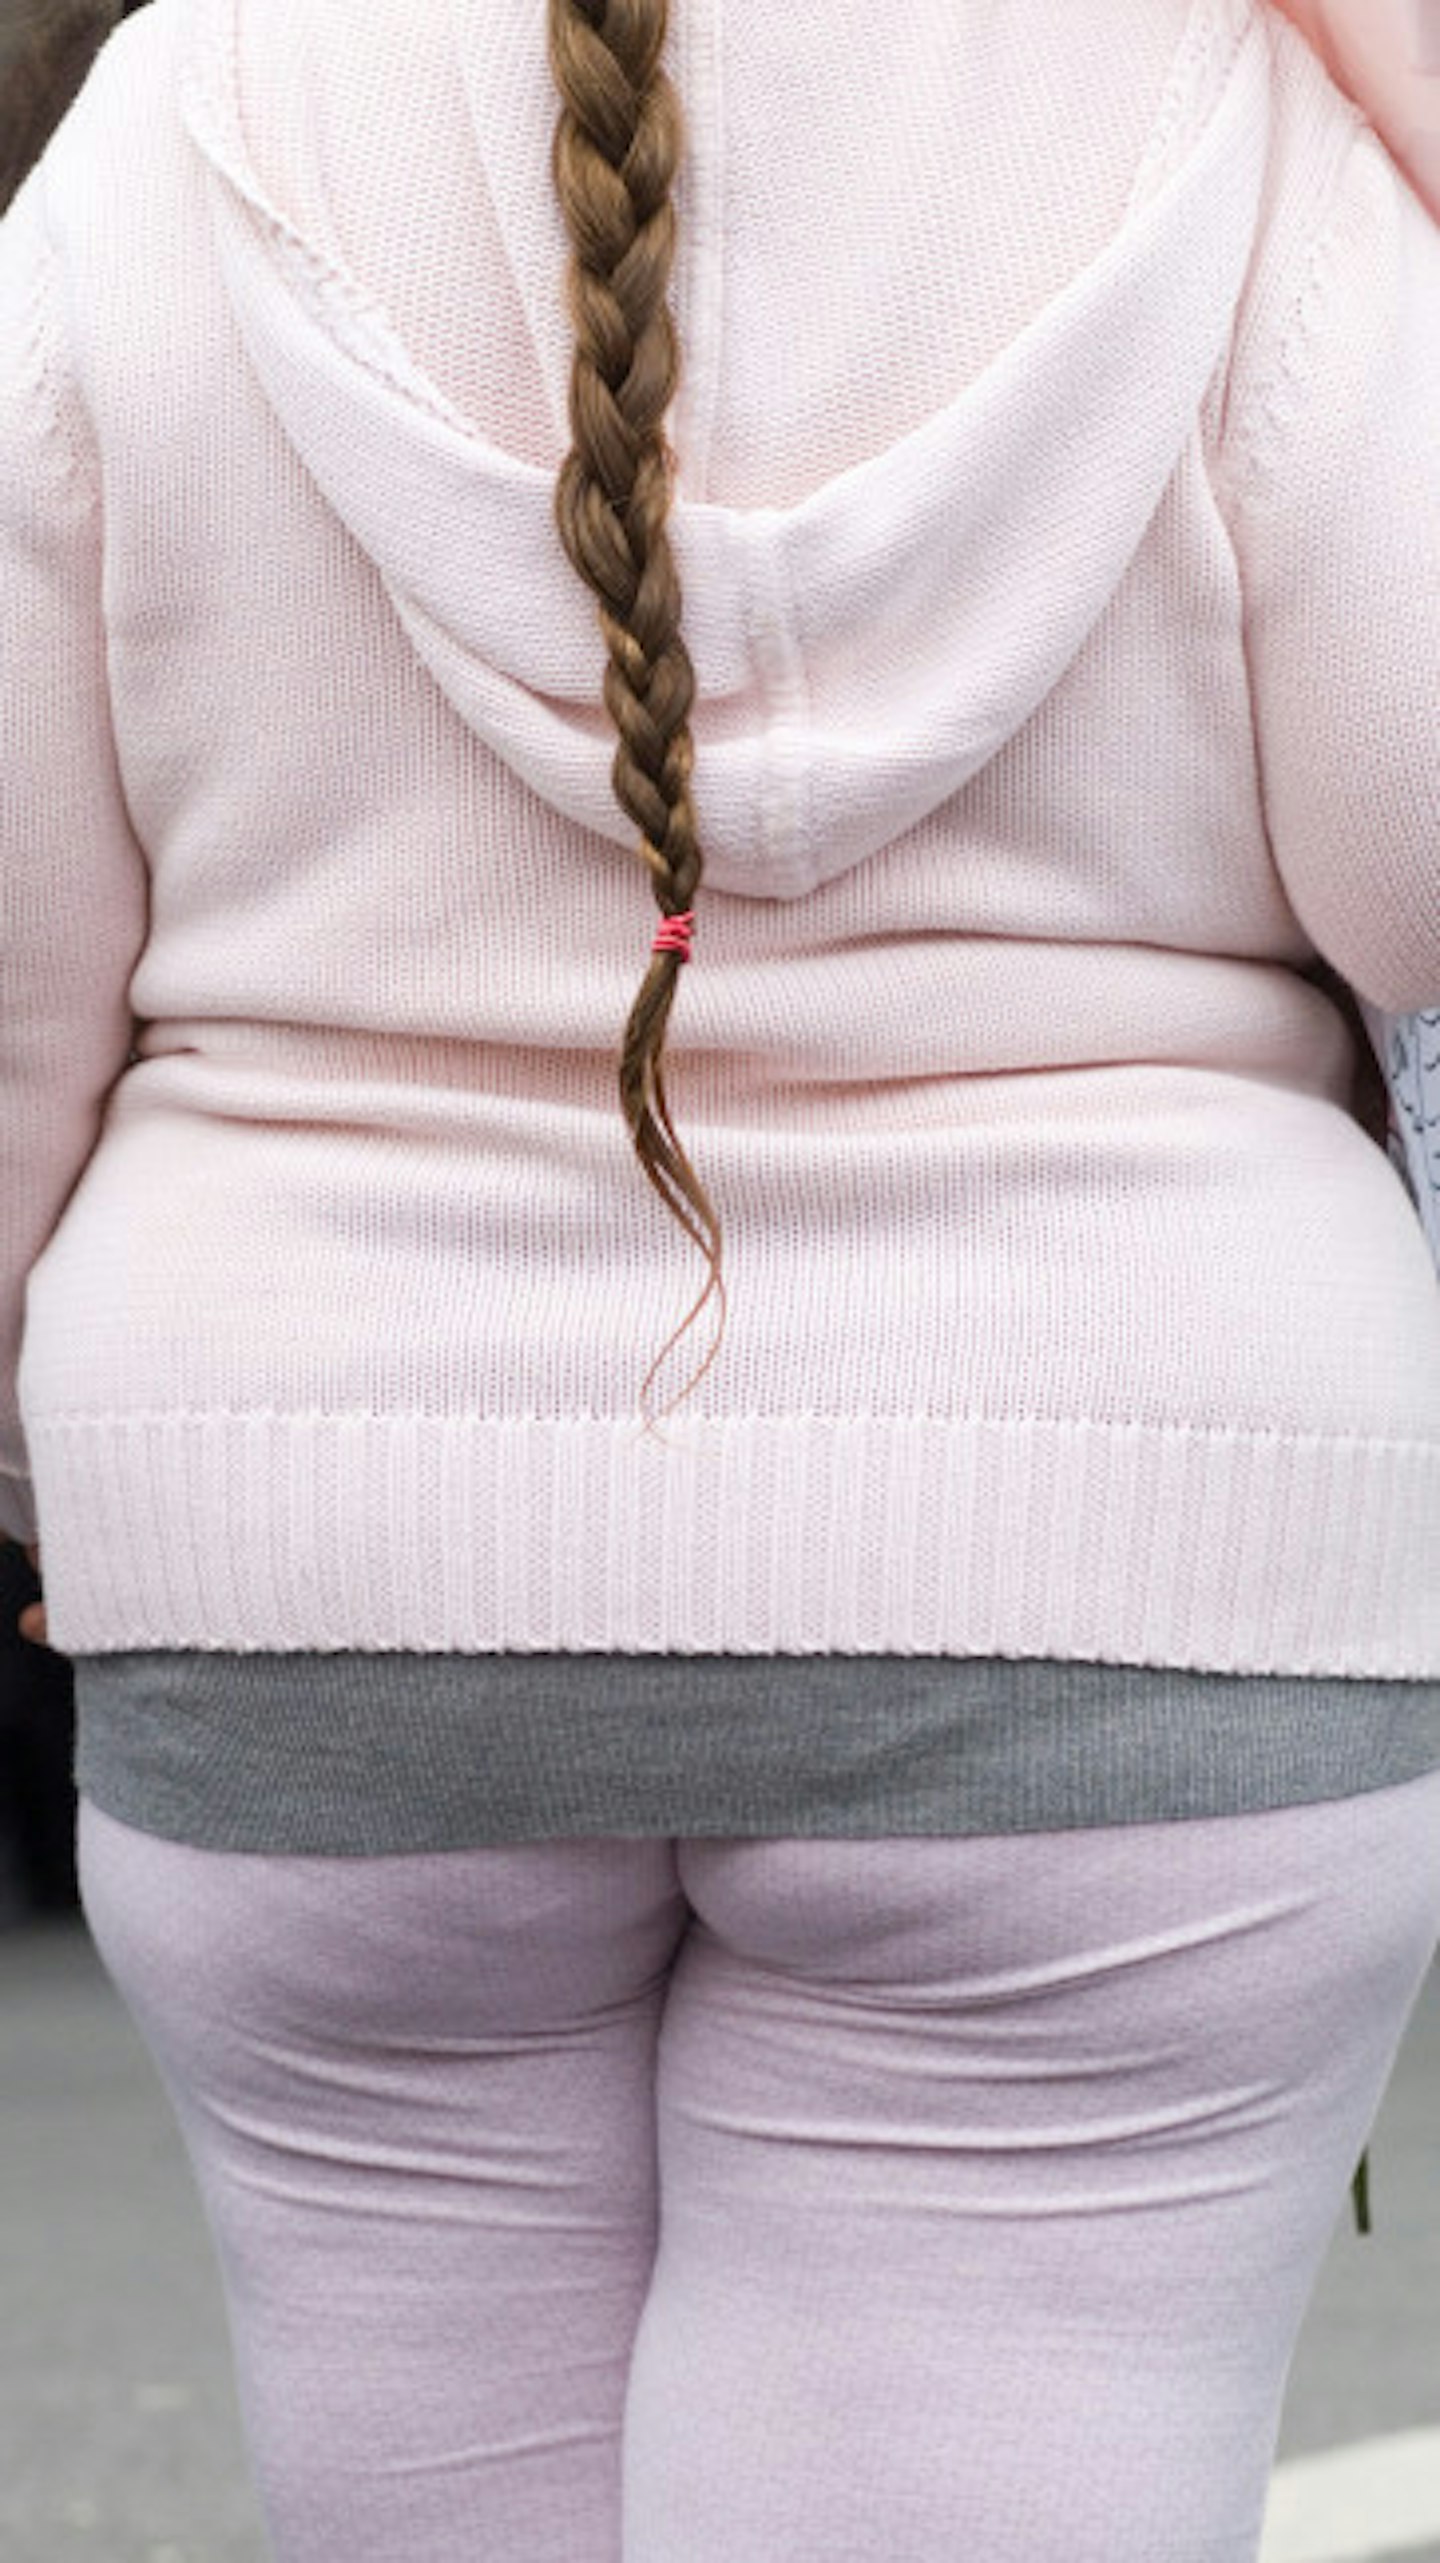 Health expert calls for parents of obese children to be sent to jail